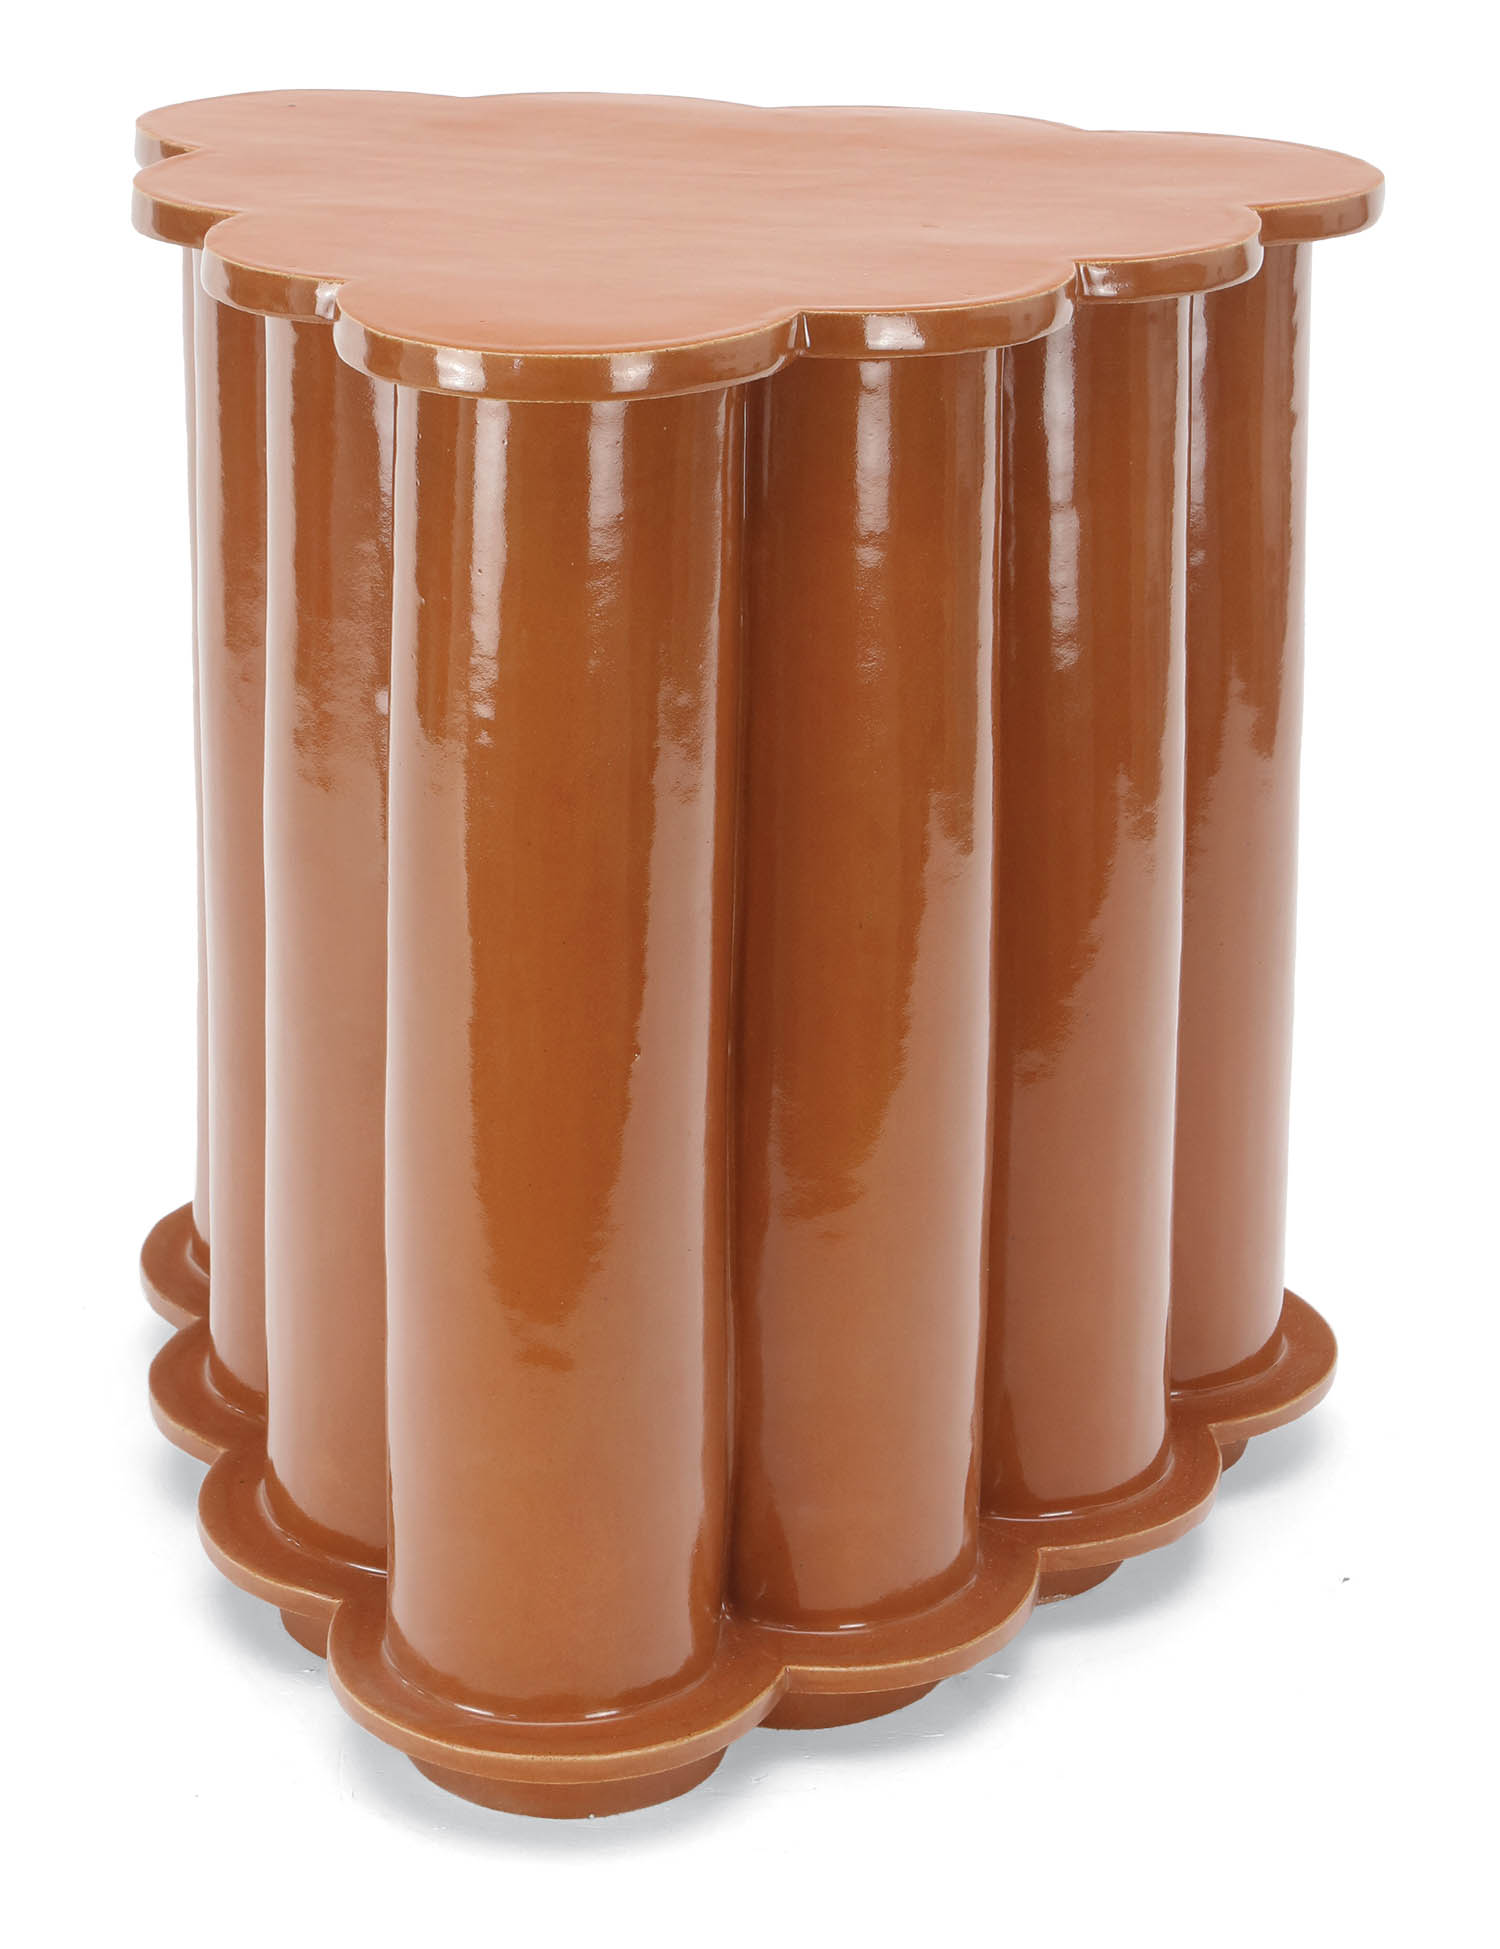 the Ruffle side table in brown